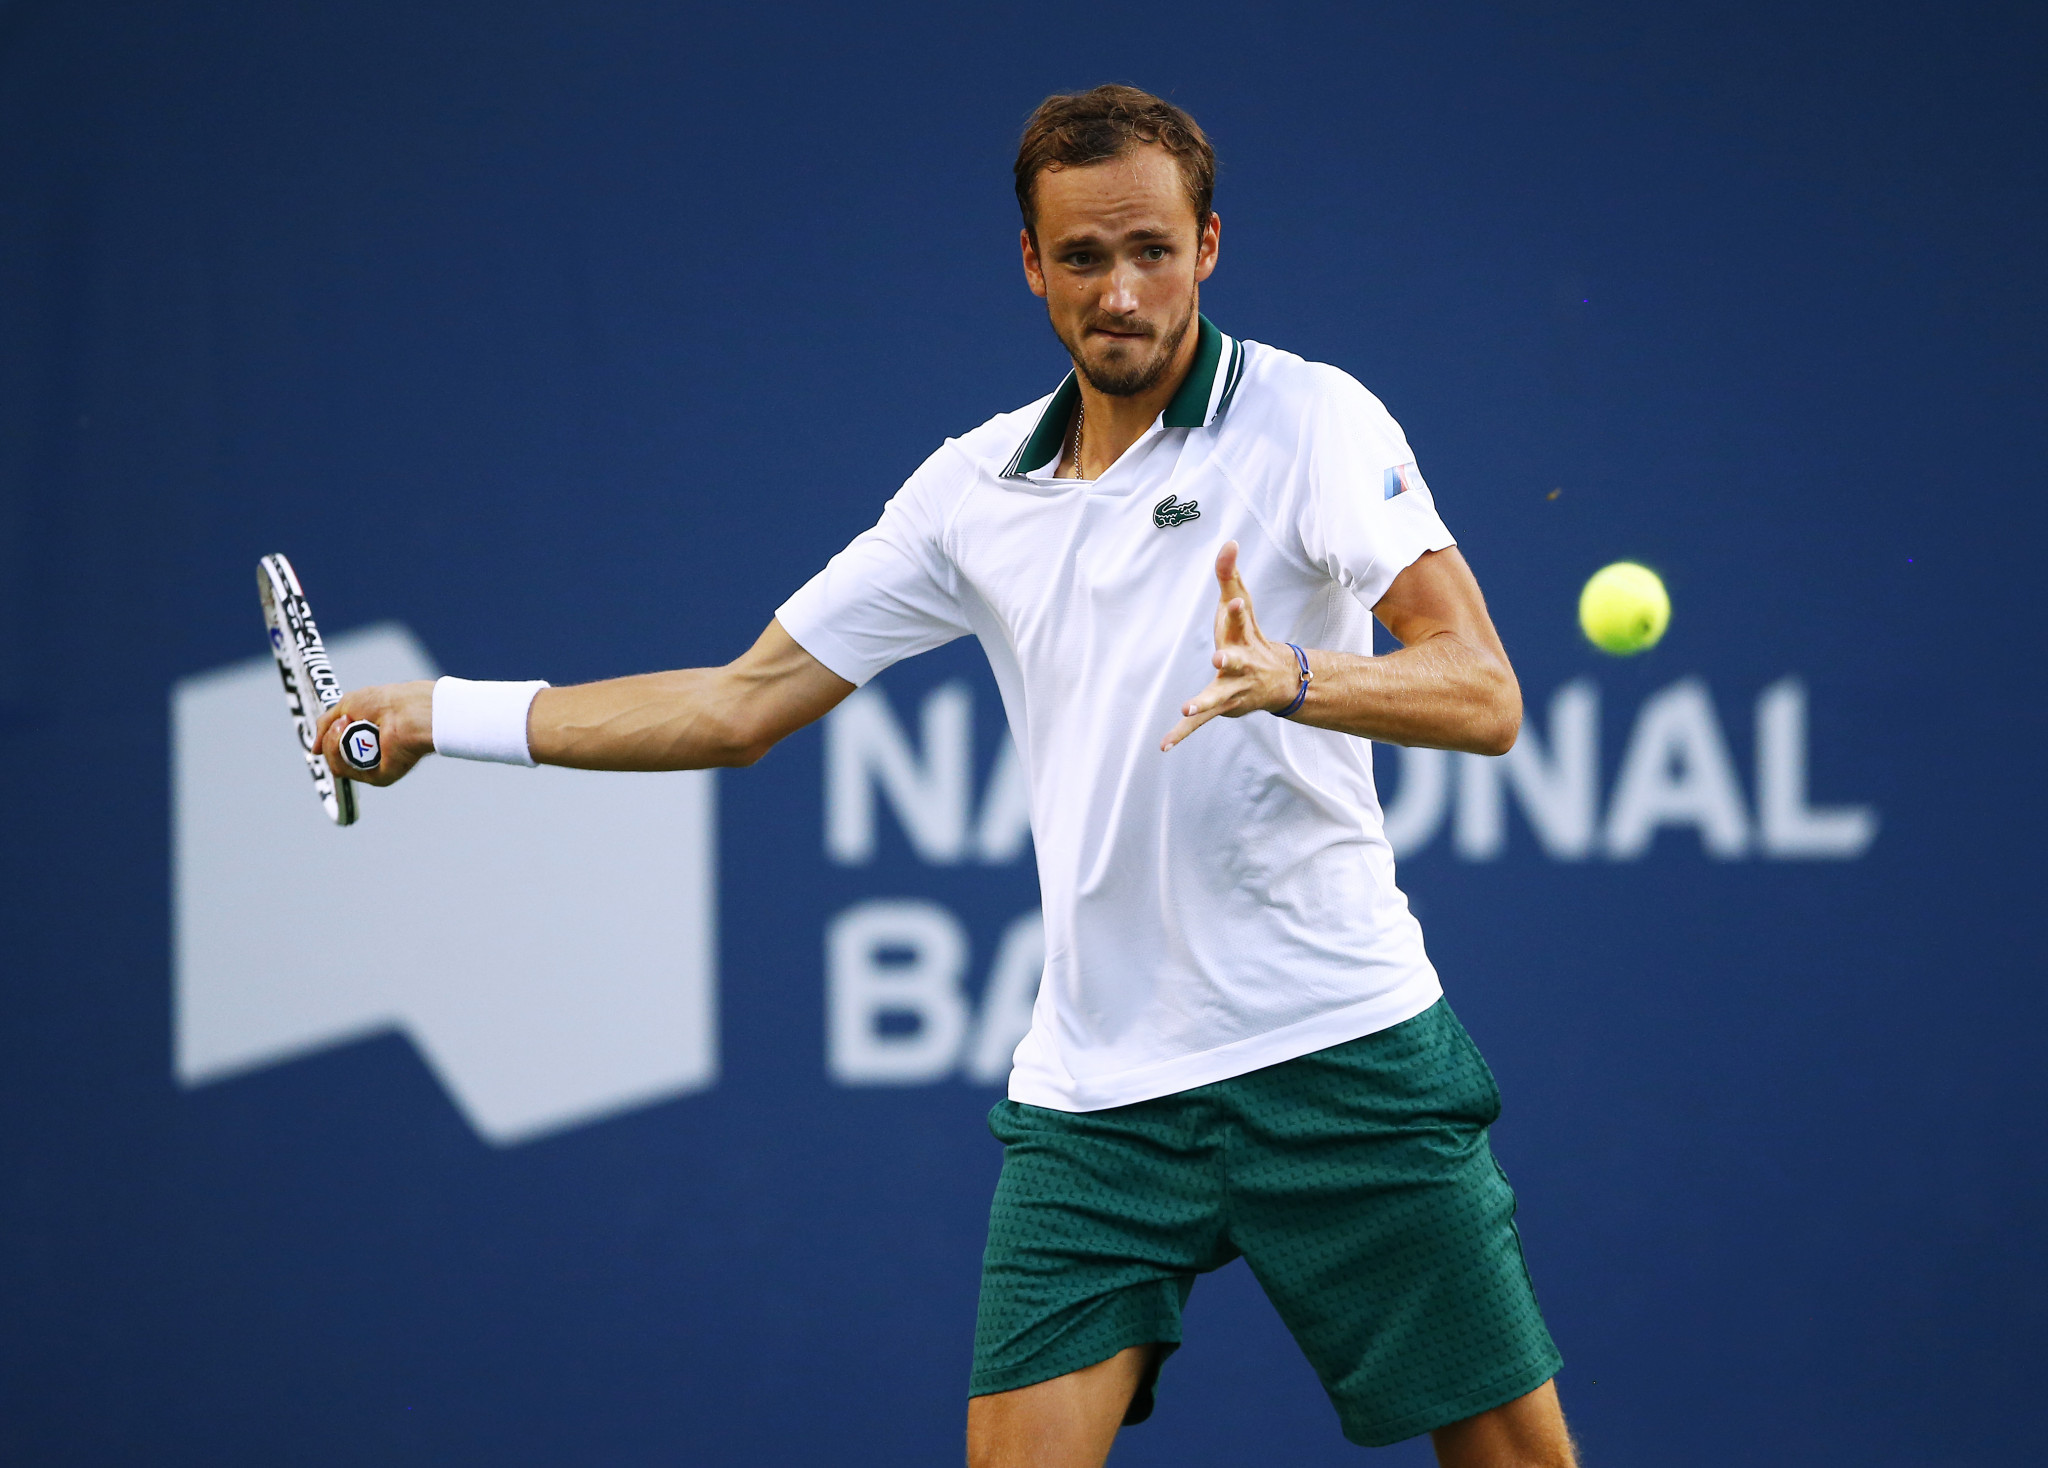 Daniil Medvedev made it to the quarter-finals at Tokyo 2020 before losing to Pablo Carreño Busta of Spain ©Getty Images